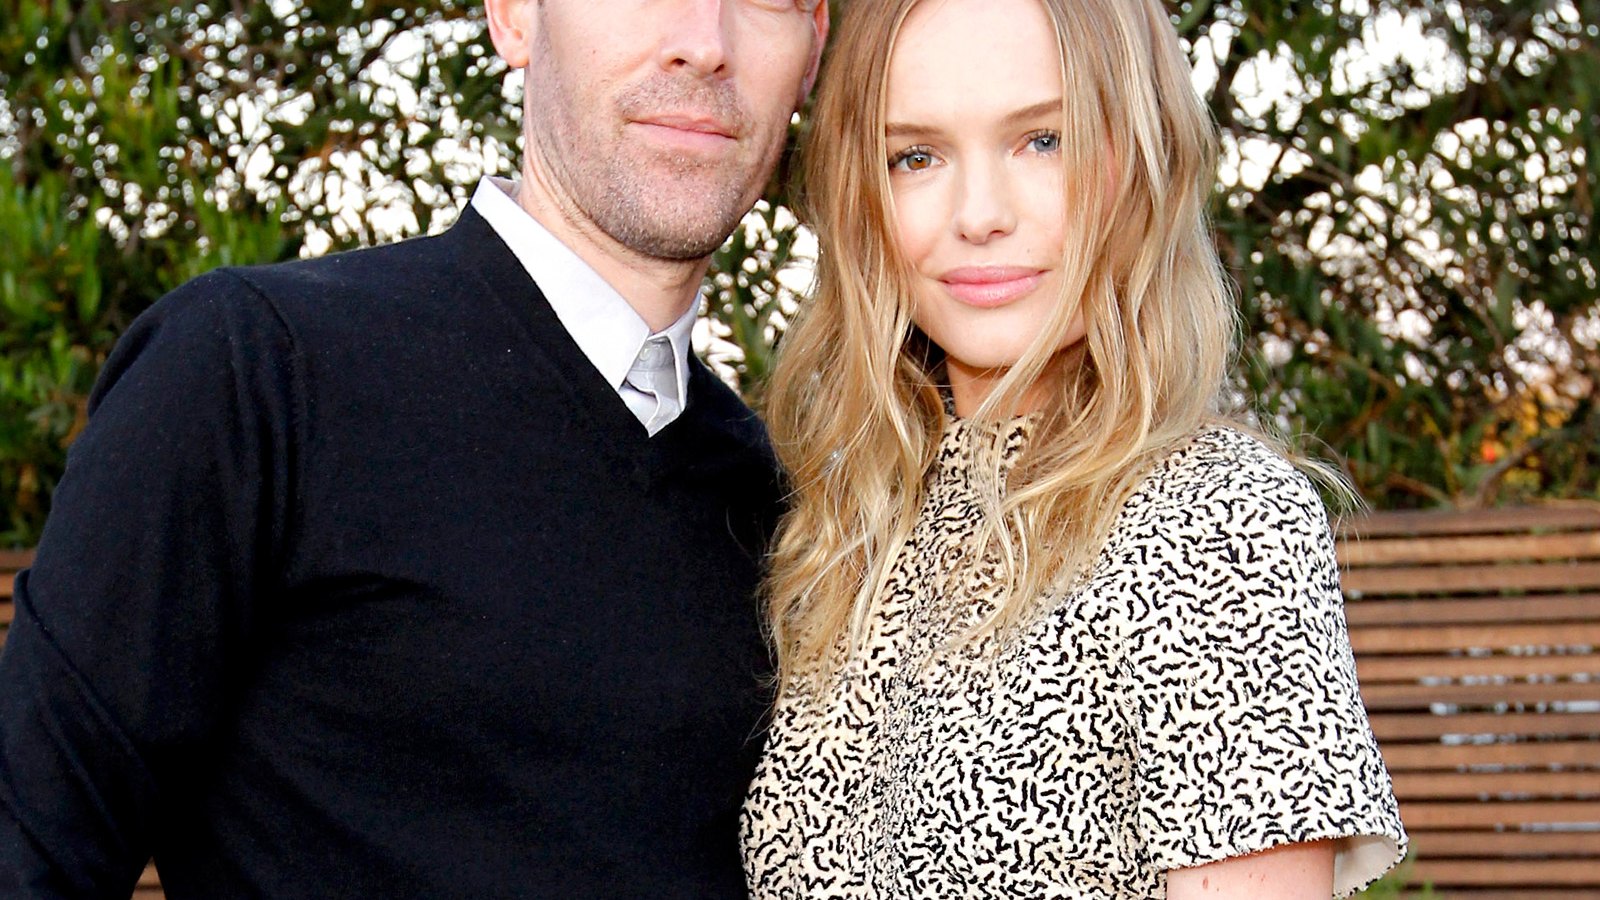 Kate Bosworth Marries Michael Polish In Intimate Ranch Wedding